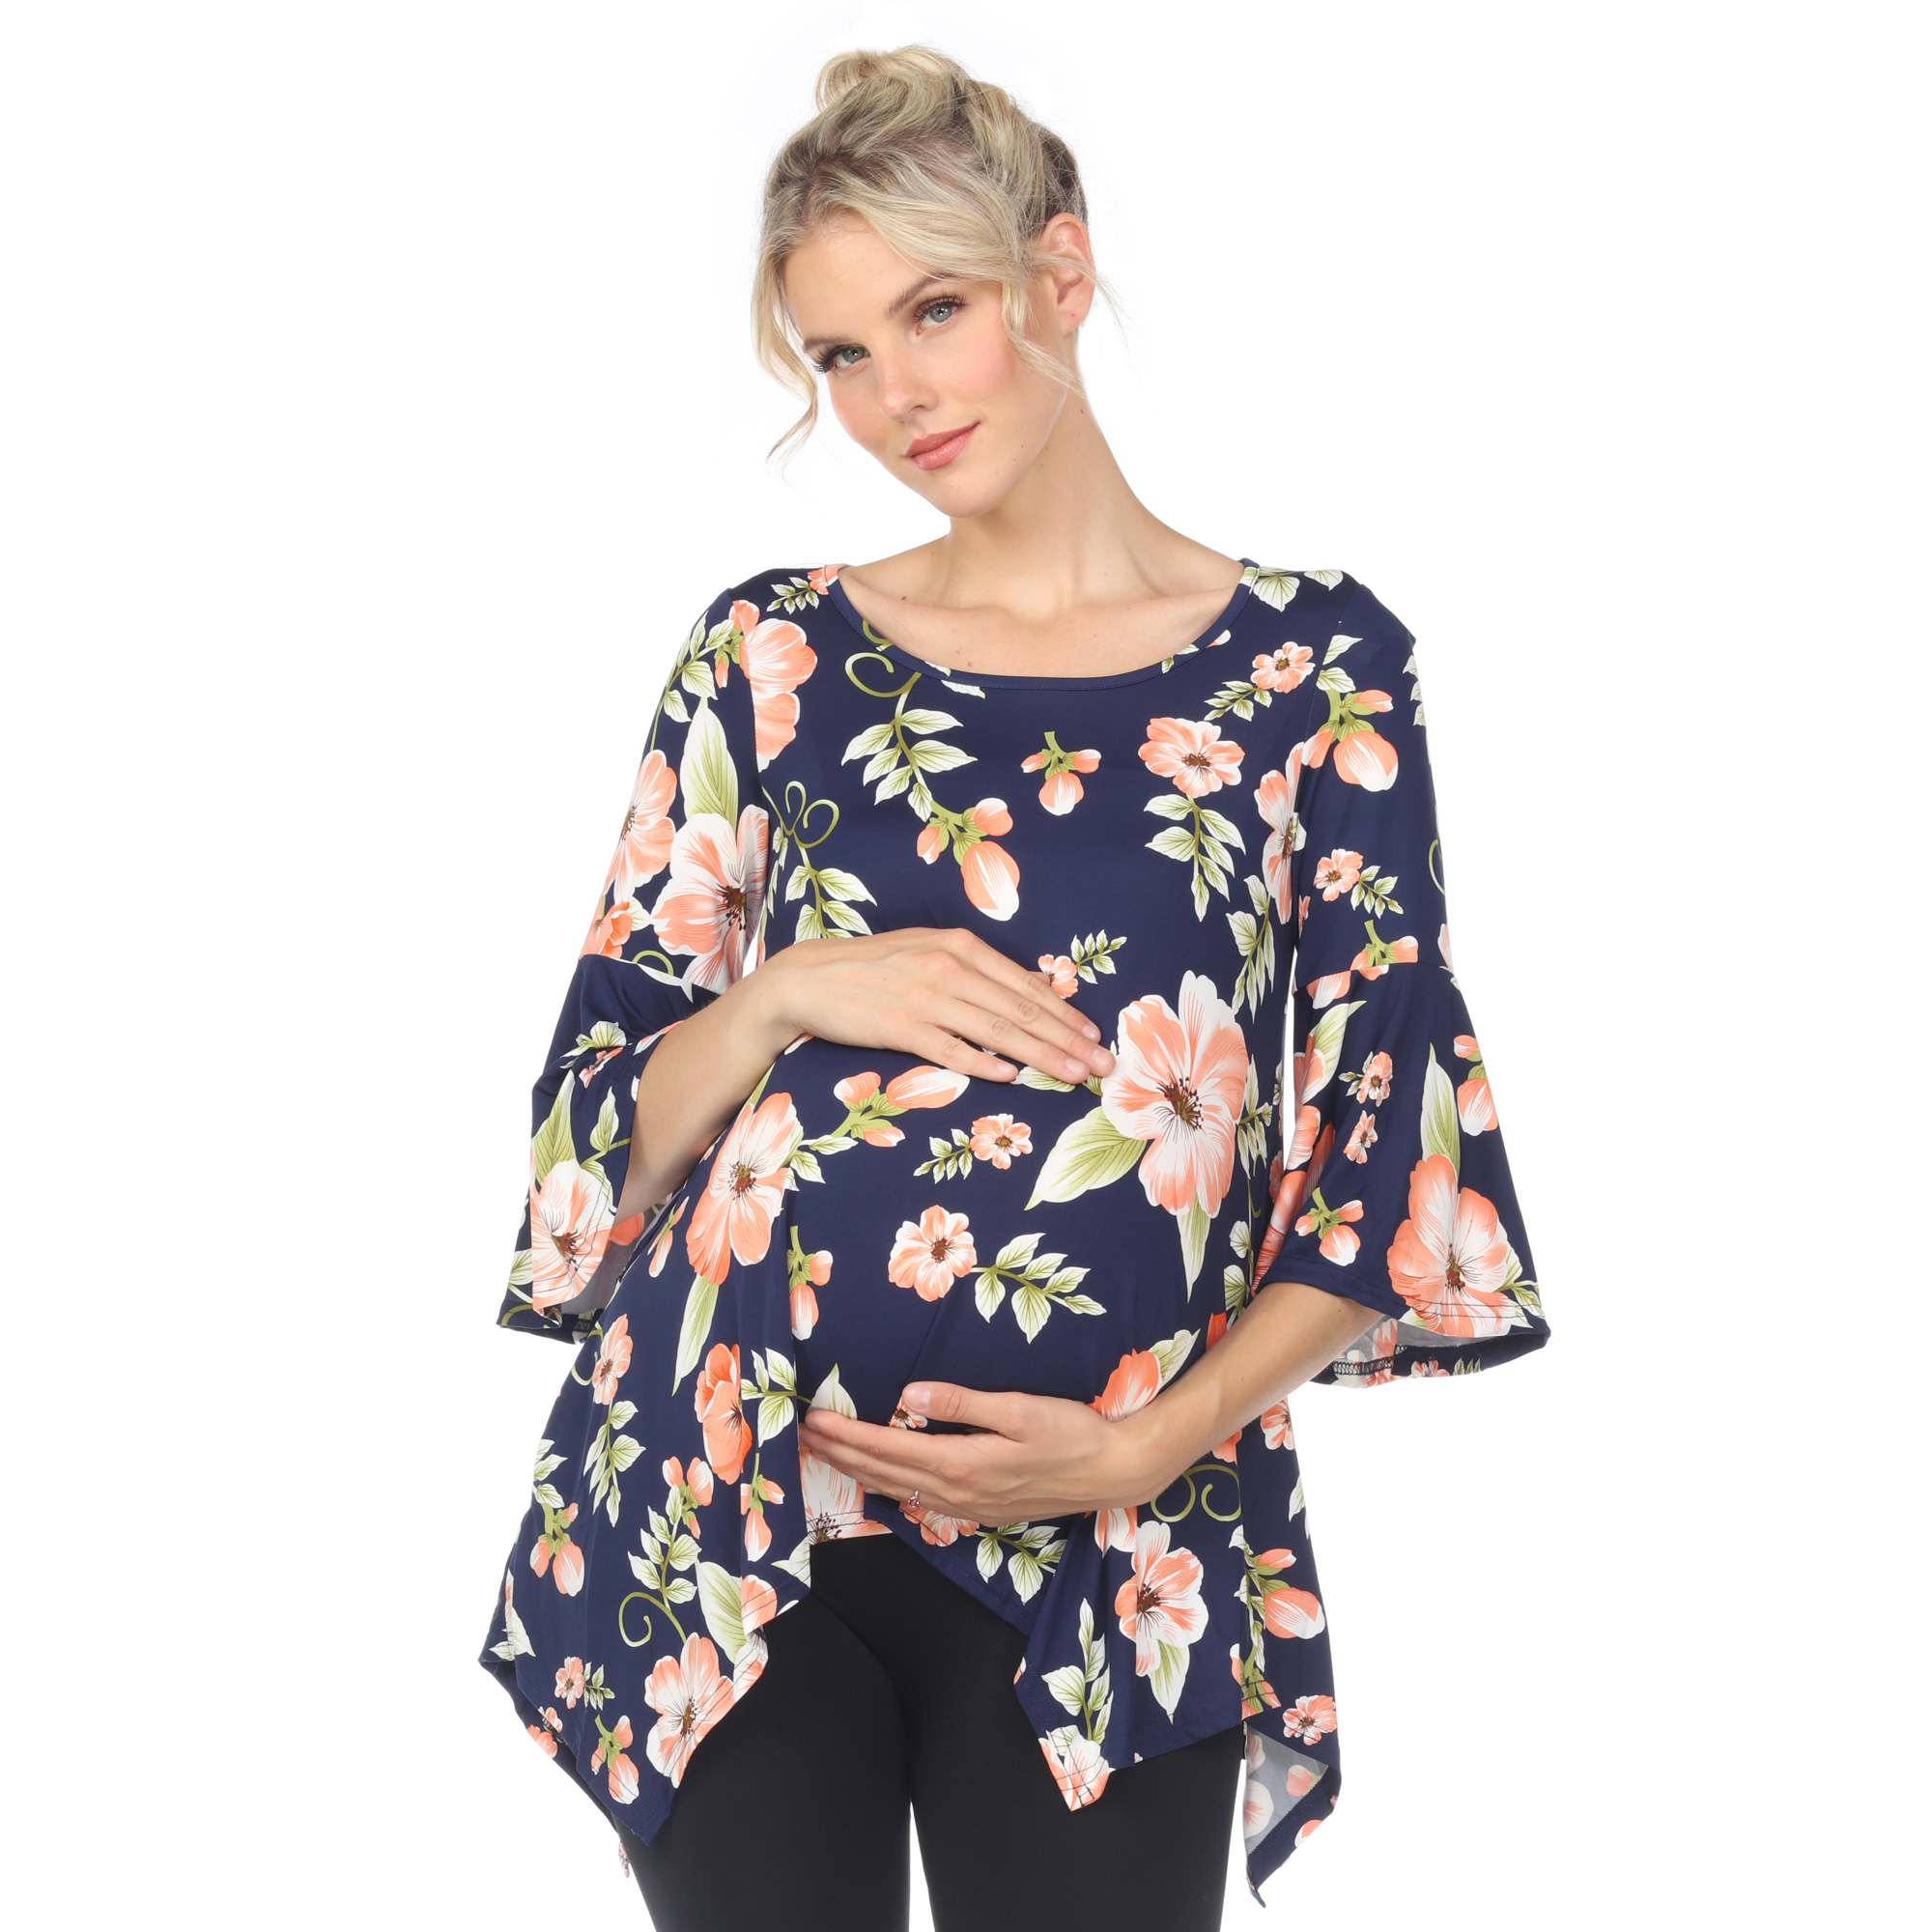 White Mark Women's Maternity Floral Print Quarter Sleeve Tunic Top With Pockets - Peach Flower, X-Large